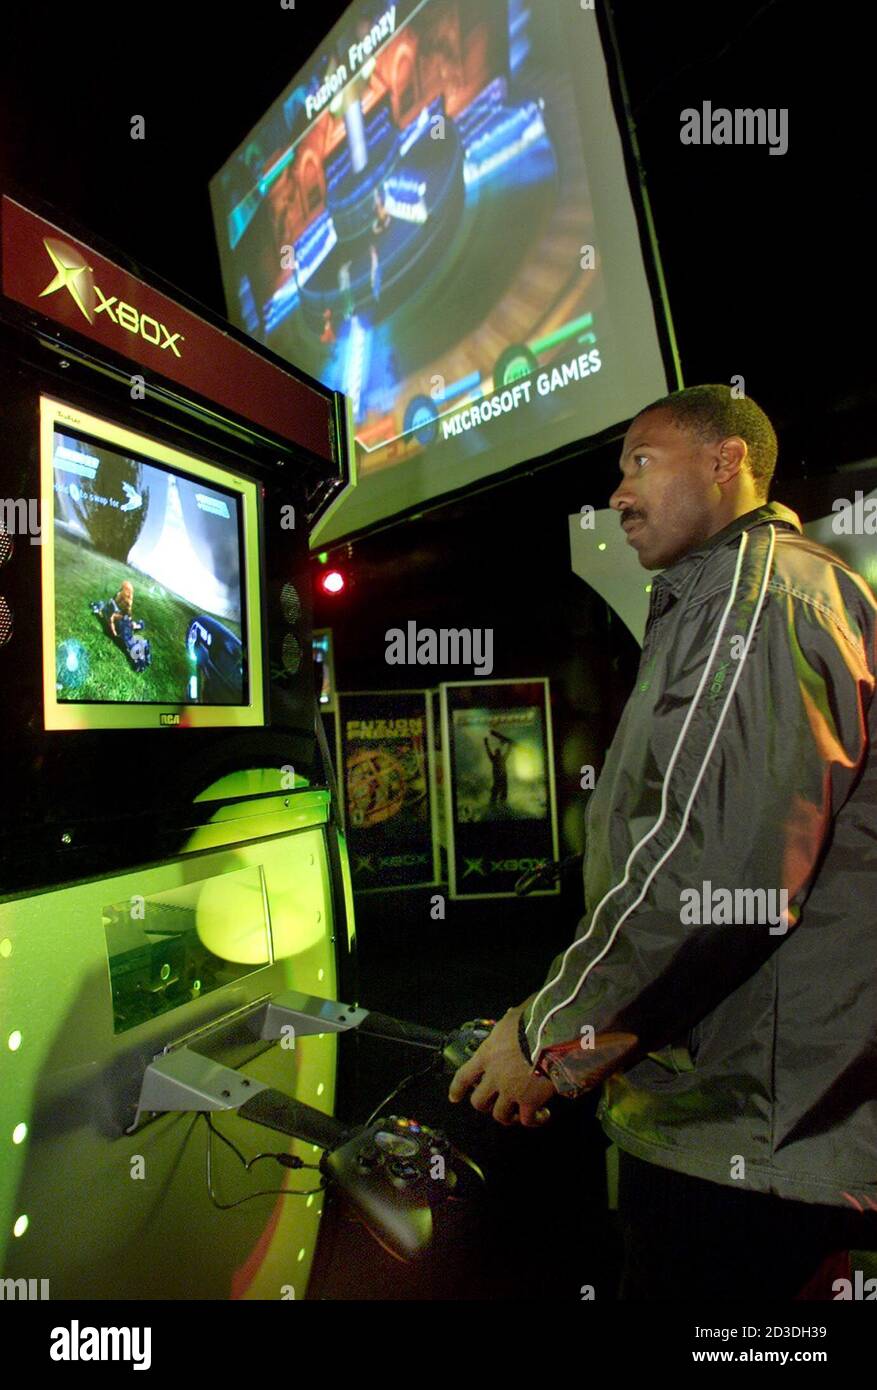 Rome Reddick plays at a Microsoft XBOX video game console at the XBOX  Odyssey media preview in Seattle, Washington, October 26, 2001. The much  anticipated XBOX video game system, which rivals Sony's